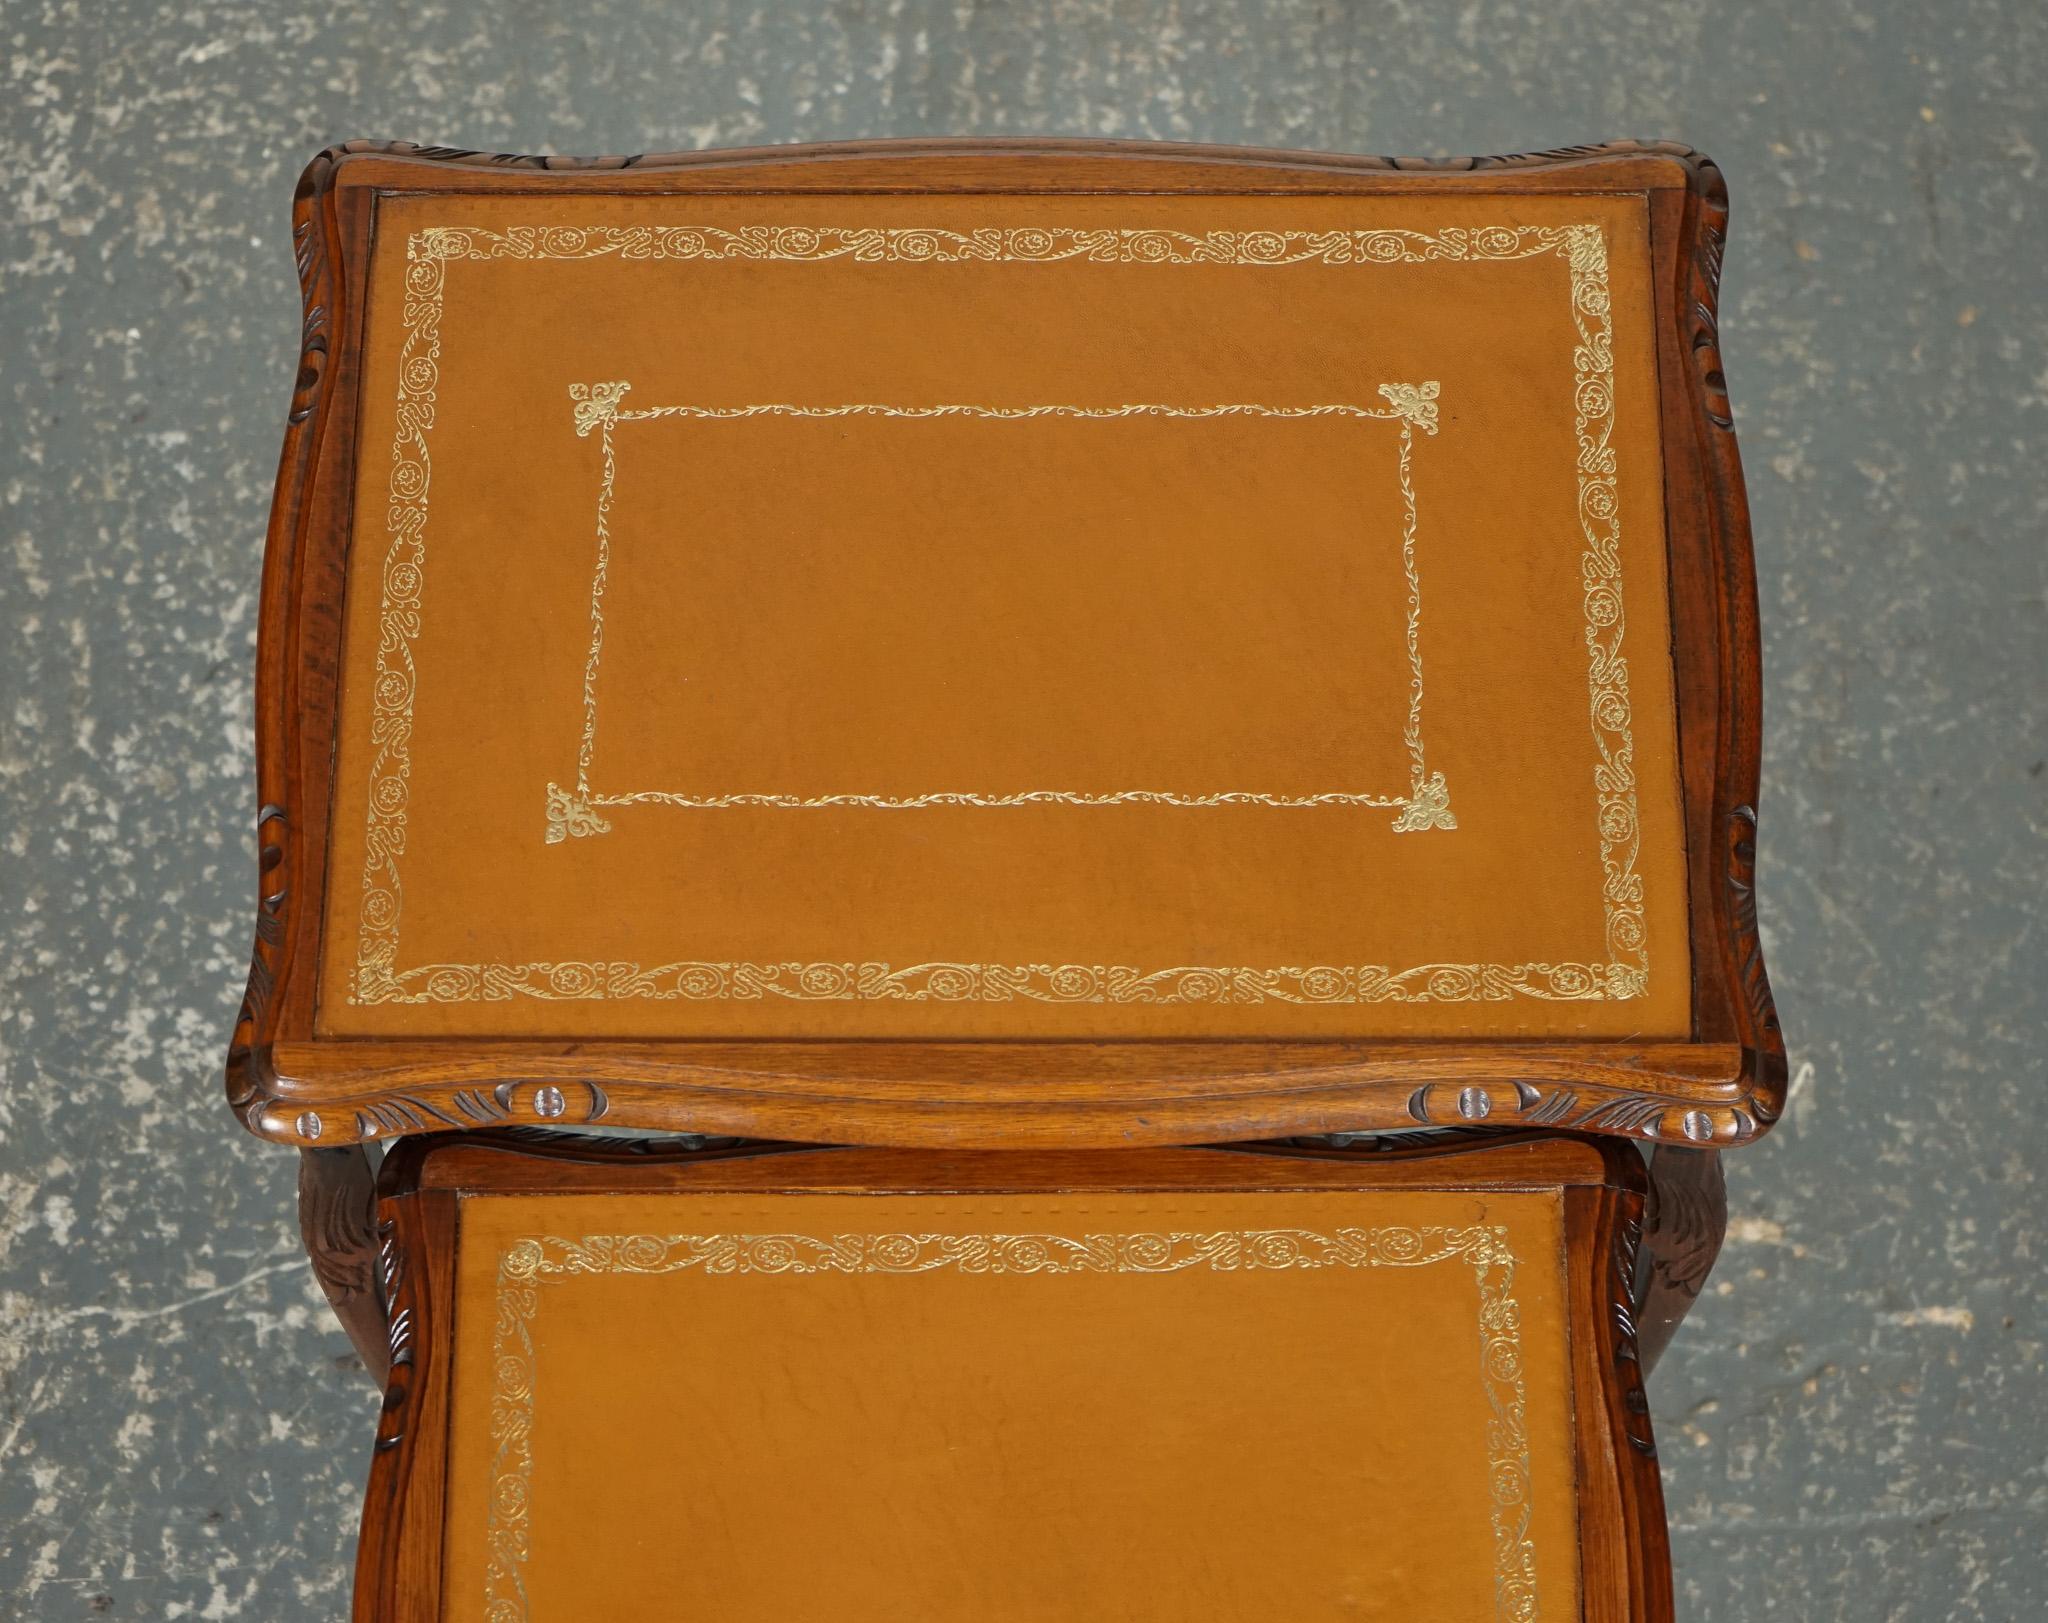 VINTAGE NEST OF TABLES QUEEN ANNE STYLE LEGS WiTH BROWN EMBOSSED LEATHER TOP J1 For Sale 2